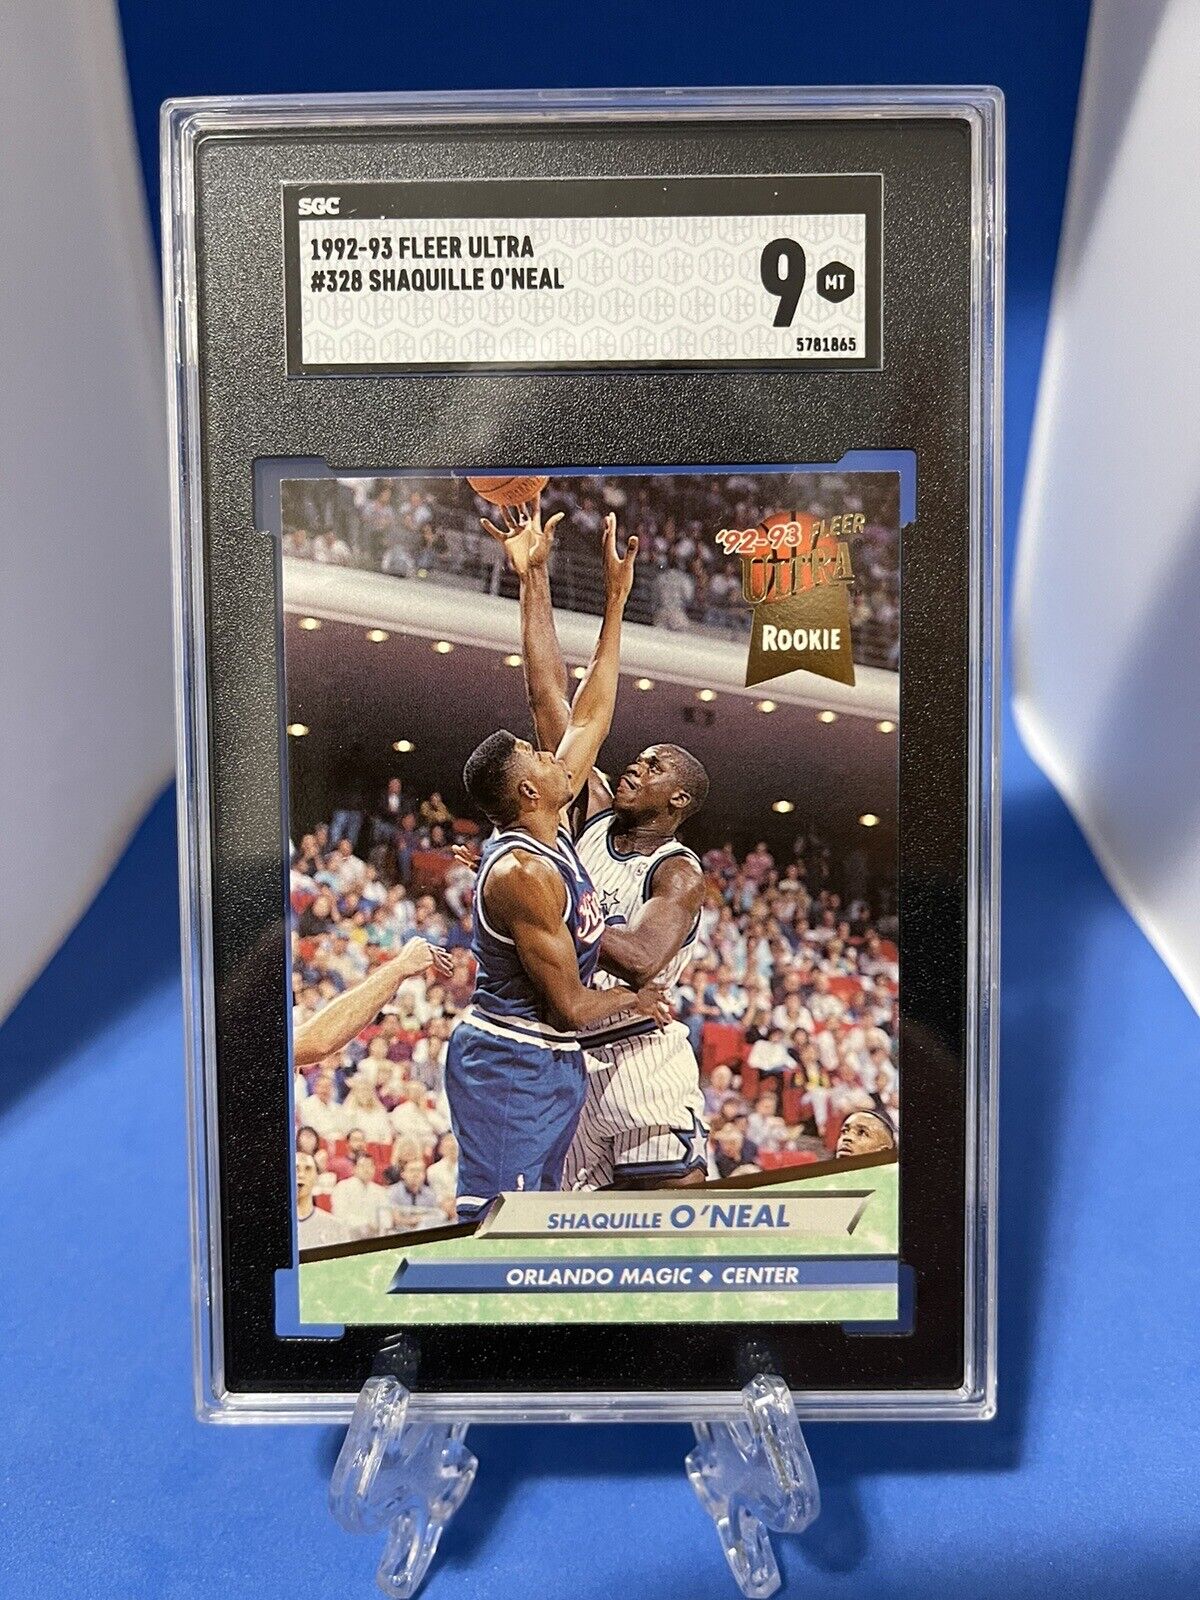 SHAQUILLE O’NEAL 1992 Fleer Ultra ROOKIE CARD #328 SGC 9